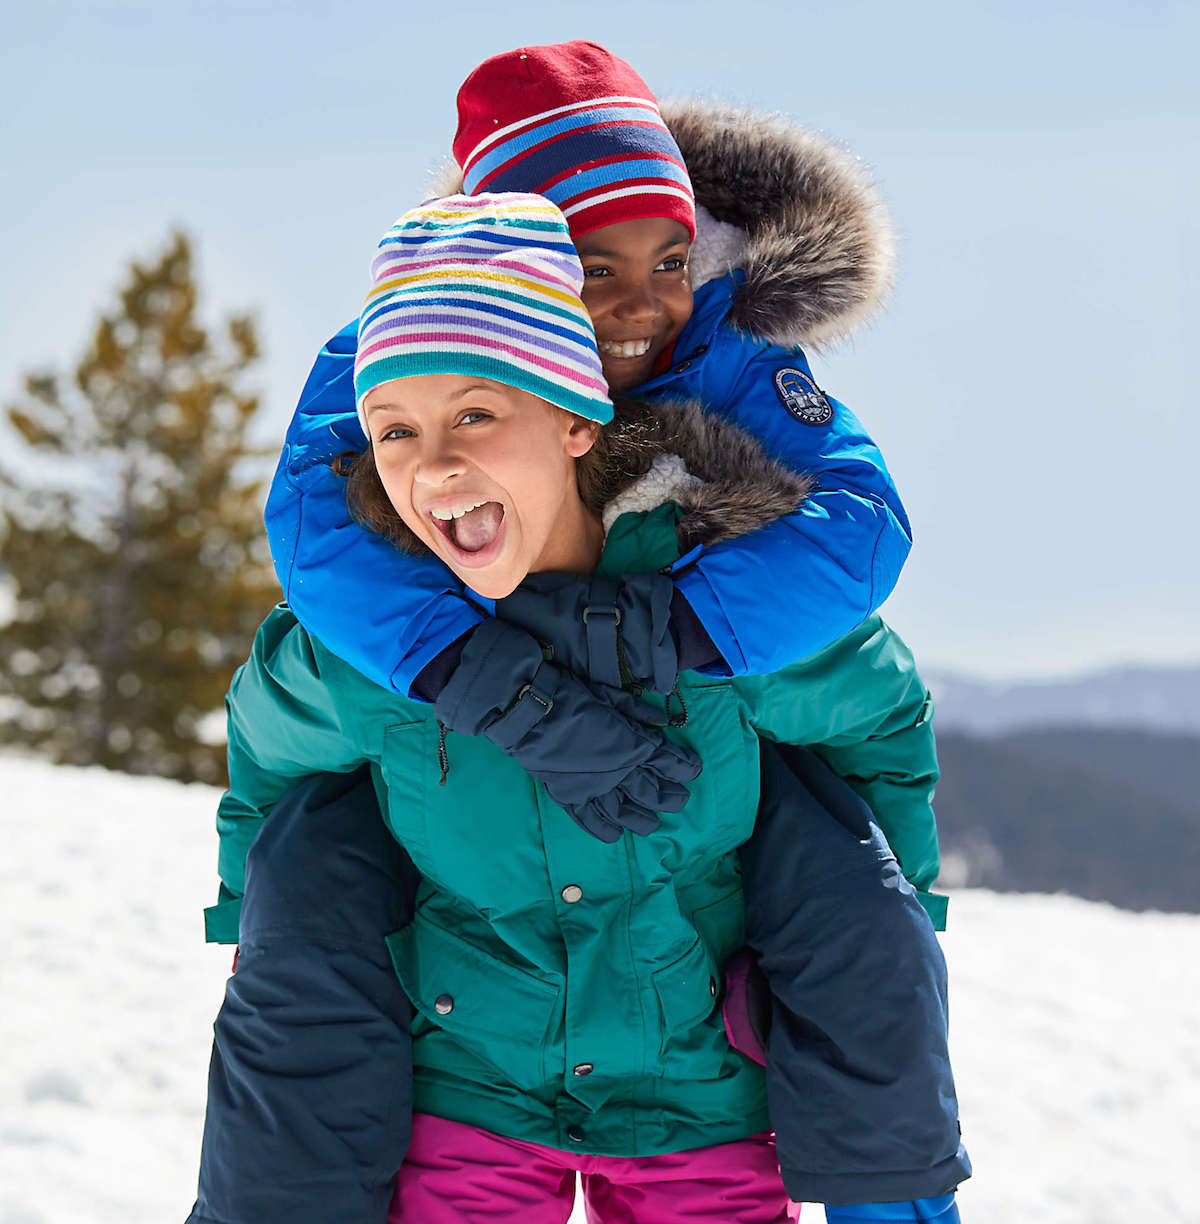 kids wearing colorful best kids winter coats lands end jackets in the snow